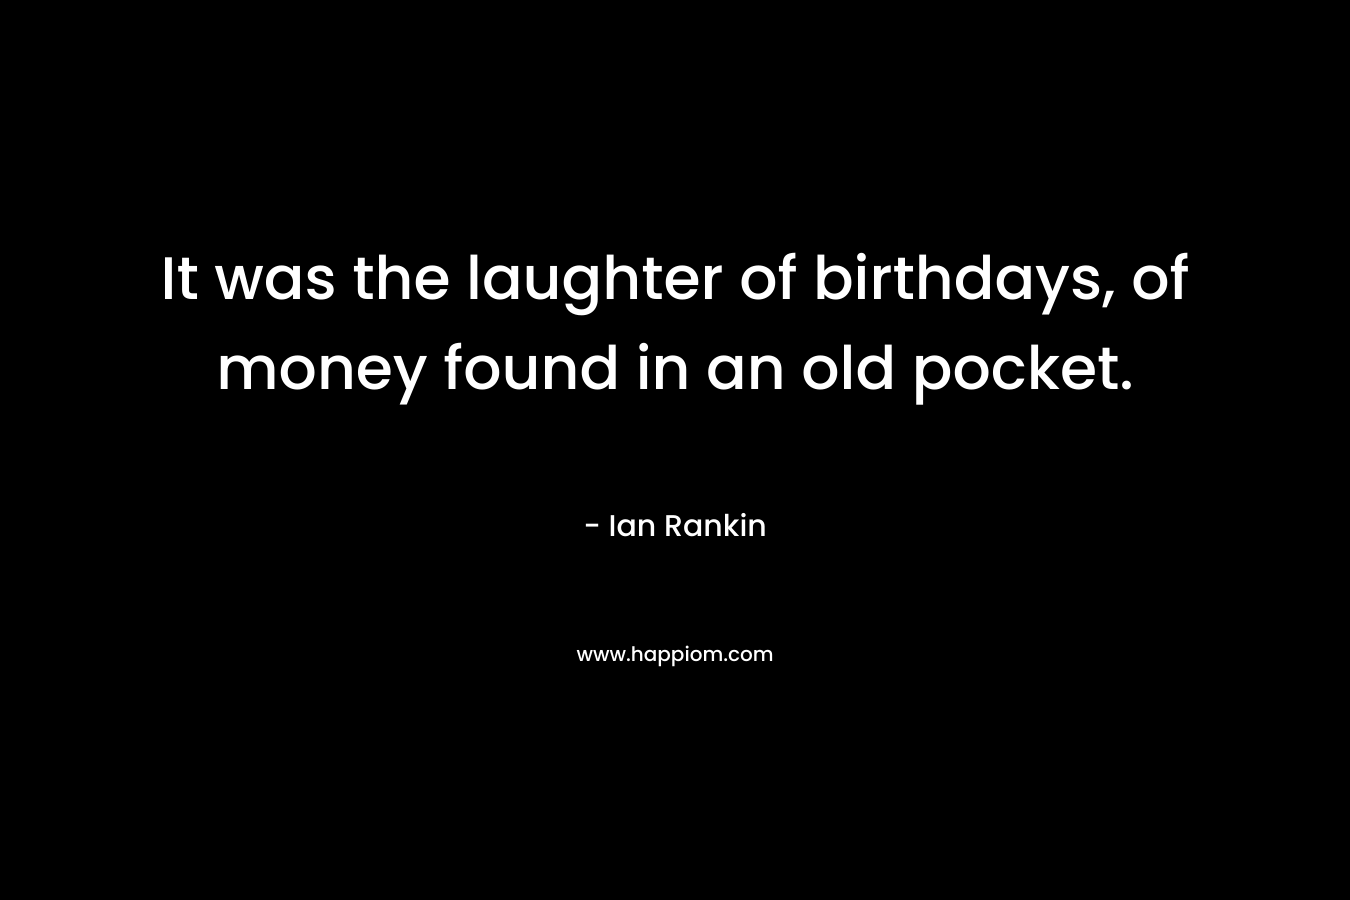 It was the laughter of birthdays, of money found in an old pocket.